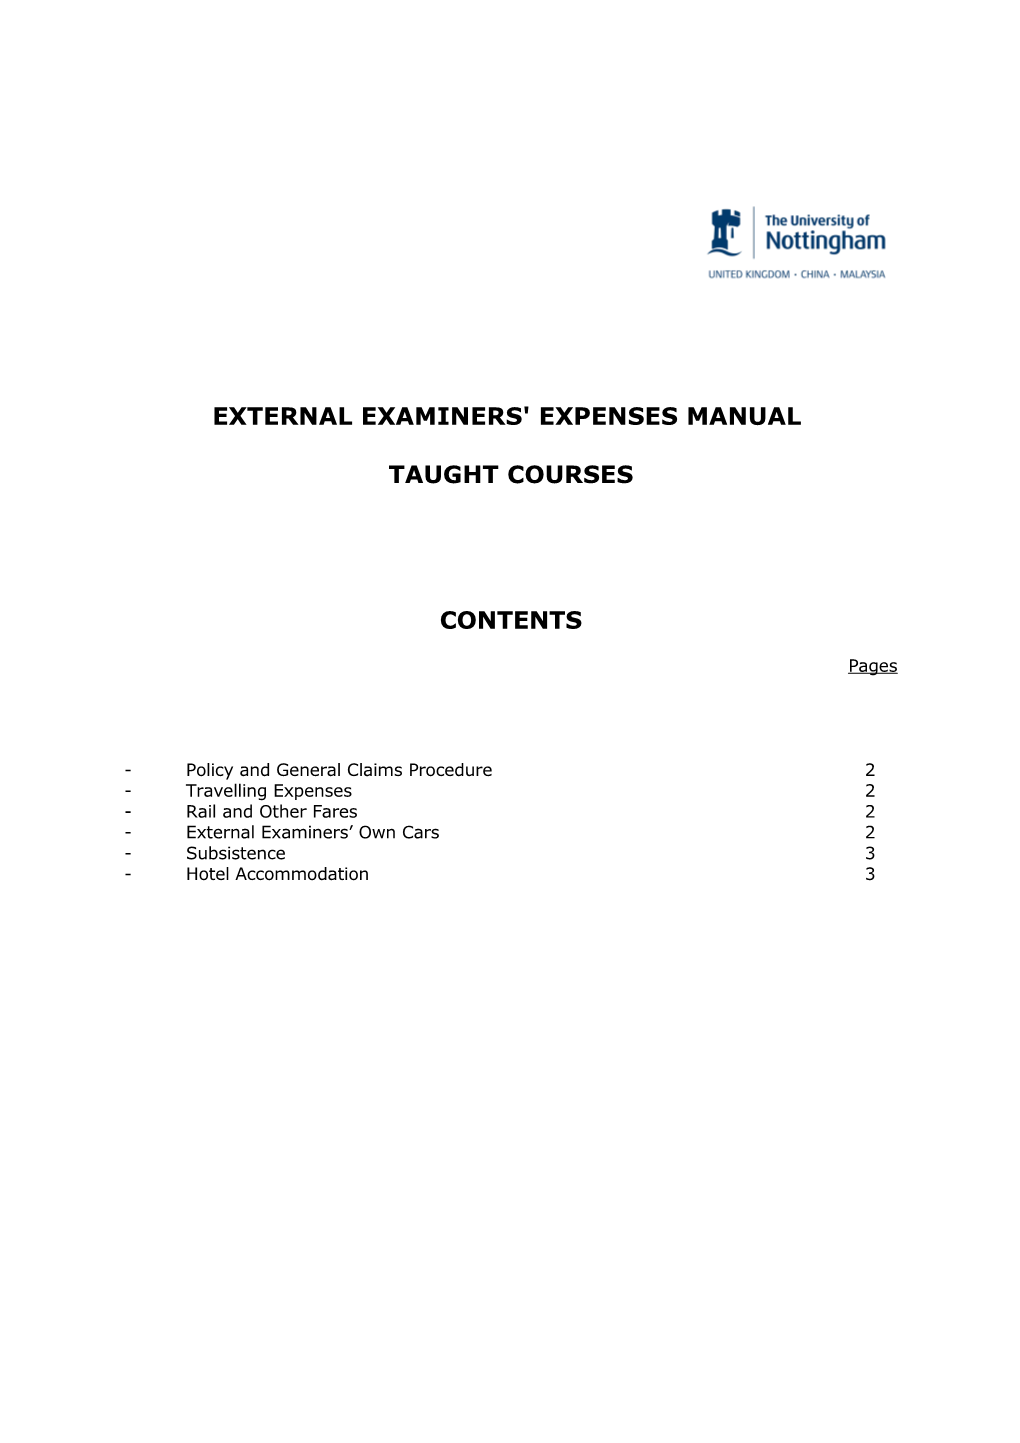 Expenses-Manual TAUGHT